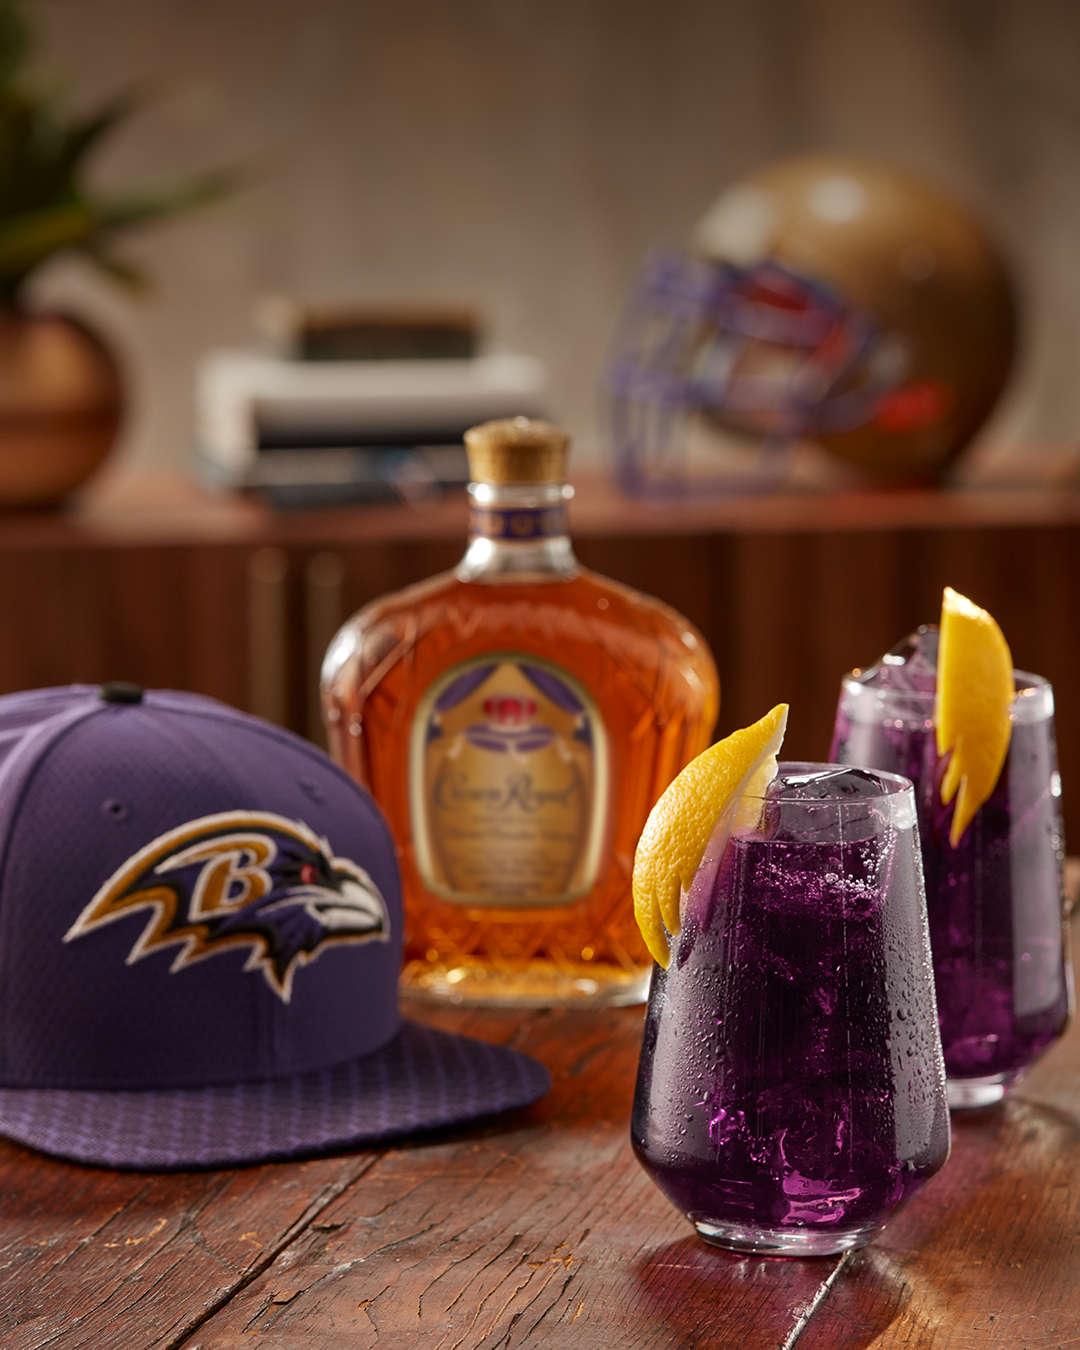 Baltimore Ravens (Crown + Grape Soda) with a bottle of Crown Royal Deluxe and a Ravens hat